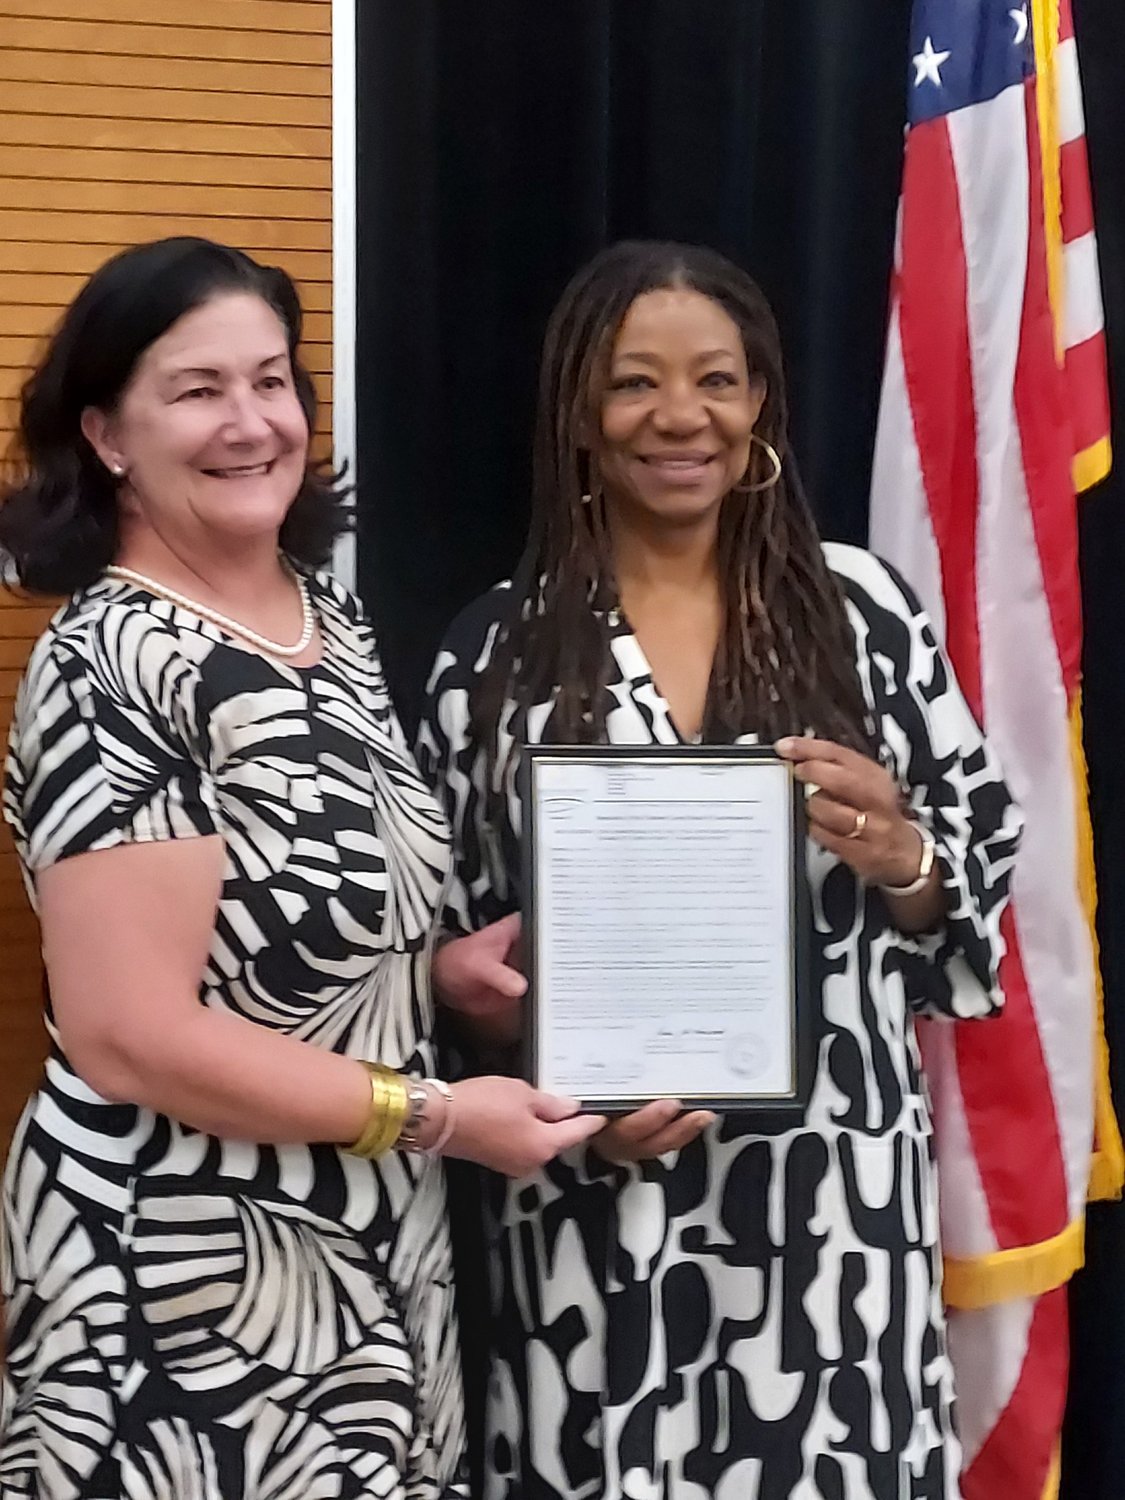 The Chatham County Board of Commissioners unanimously passed a resolution recently recognizing October as National Disability Employment Awareness Month and commemorating its 77th anniversary. The resolution was presented to Chatham Trades Director Shawn Poe (left) by Commission Chairperson Karen Howard.